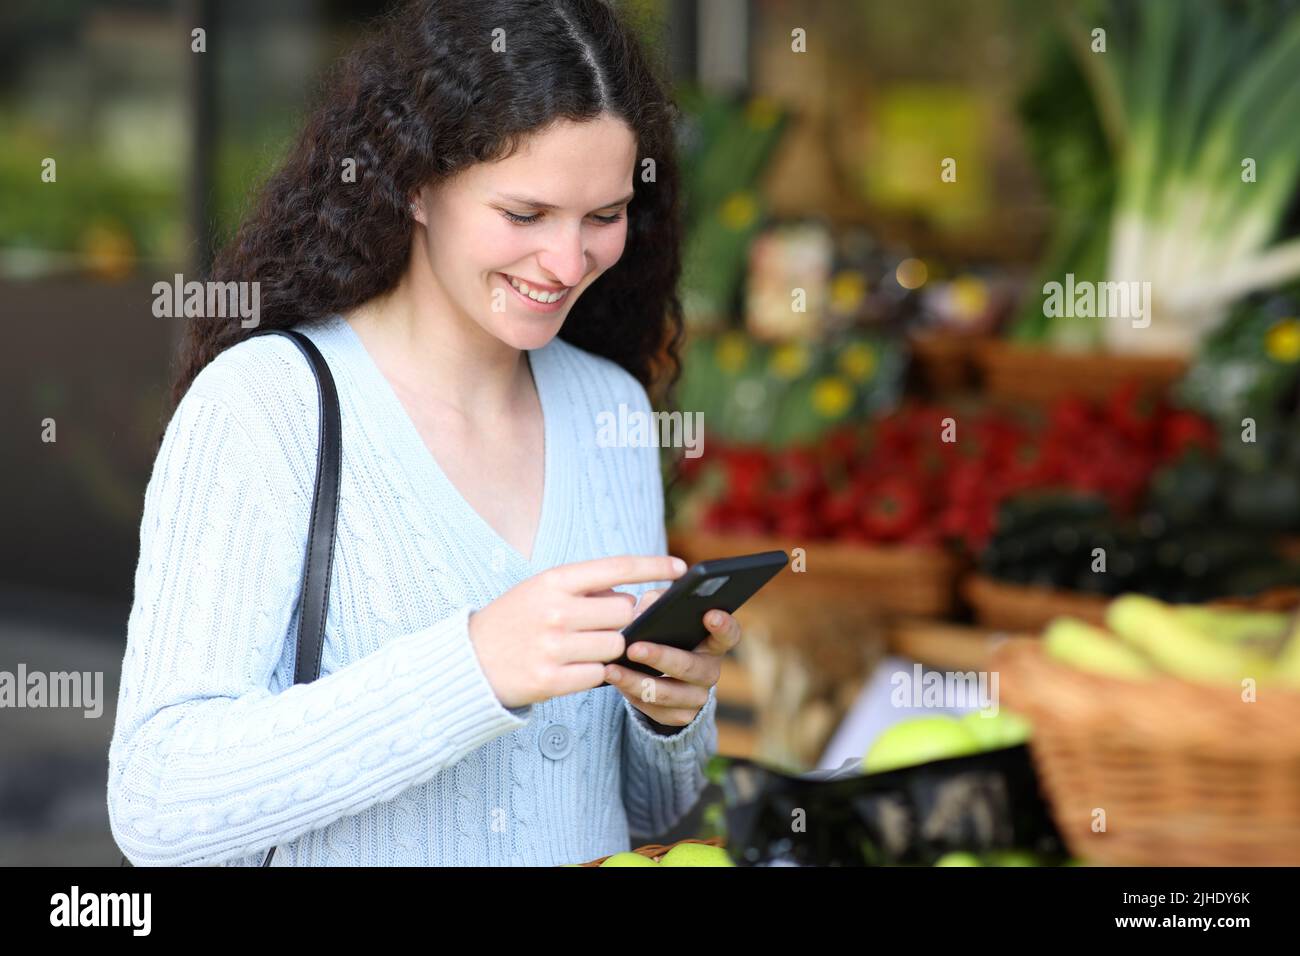 Customer using smart phone standing in a greengrocery Stock Photo